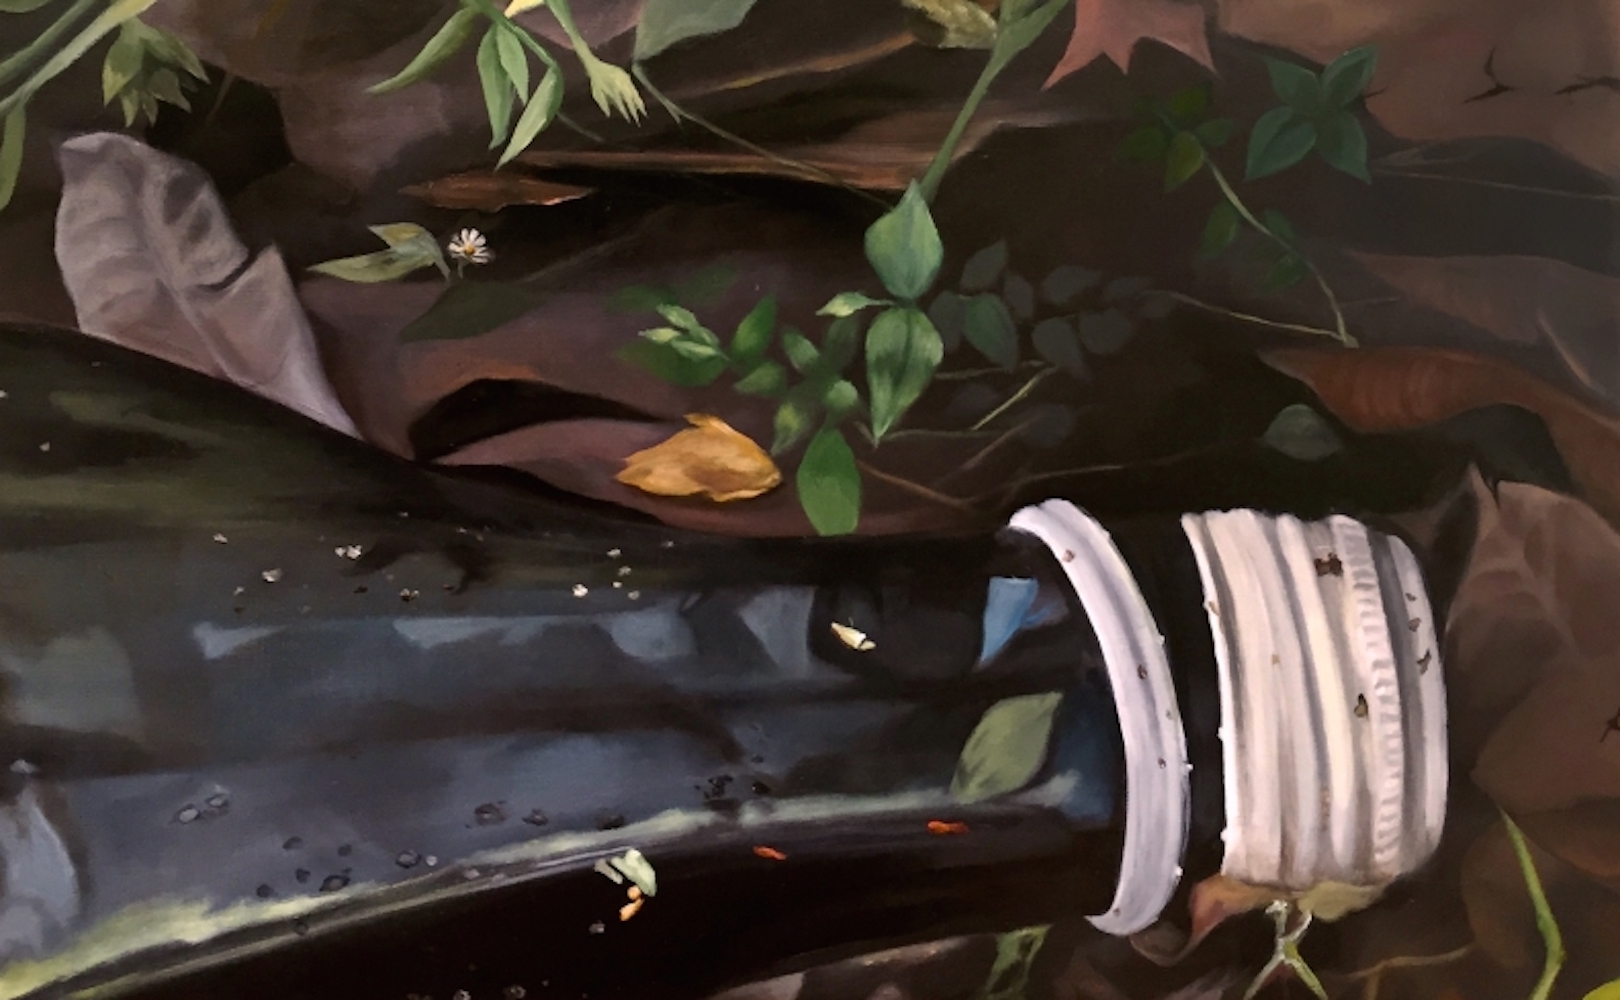 A bottle laying on top of leaves